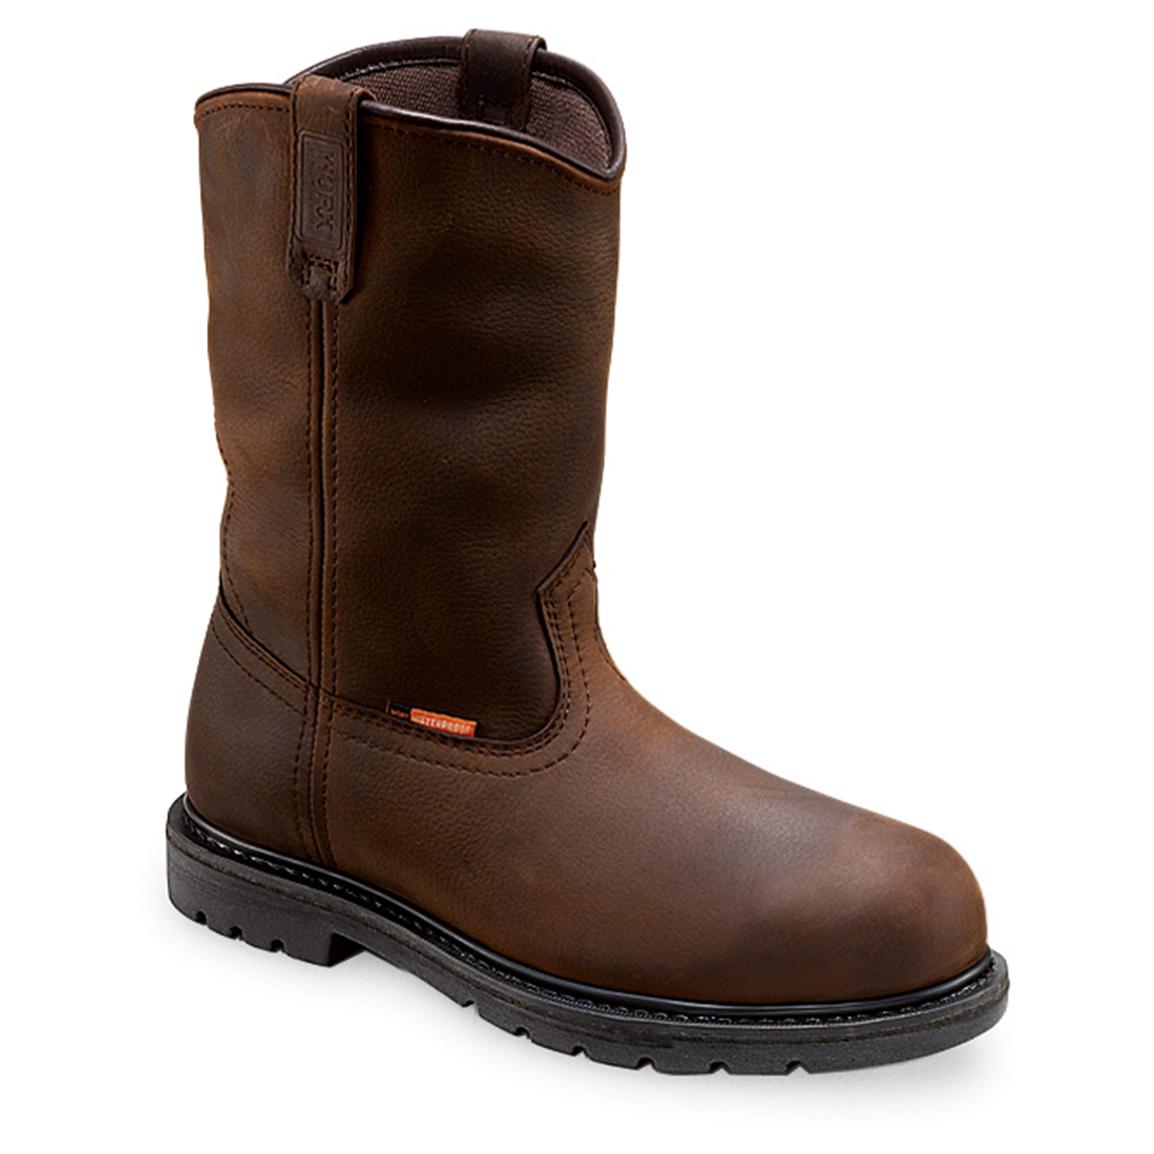 Worx® 9" Steel Toe Waterproof Pull On Boots 148330, Work Boots at Sportsman's Guide